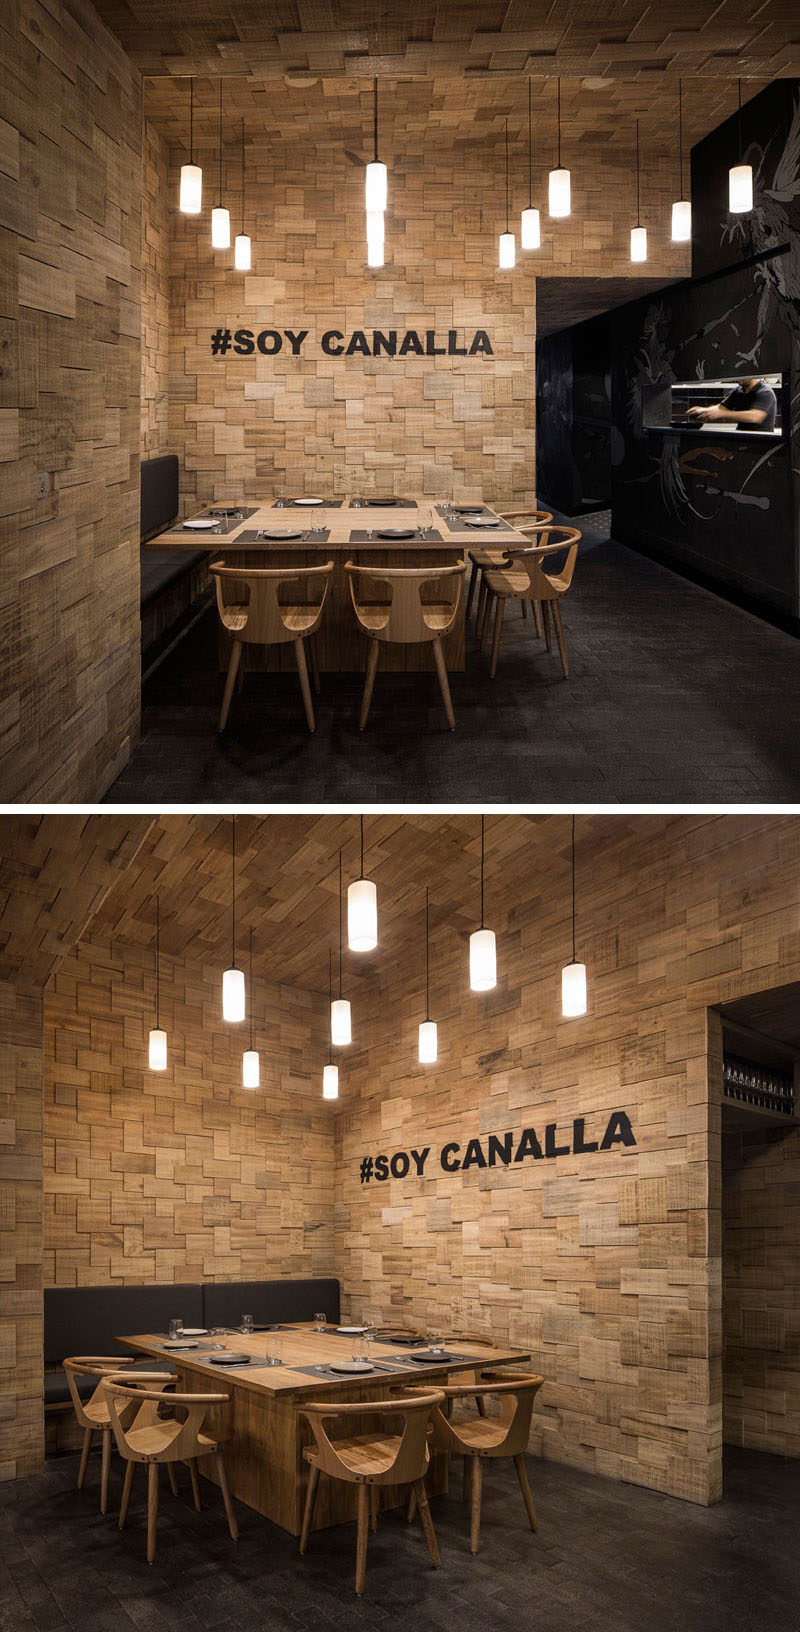 To contribute to this modern restaurant's informal concept, the walls are covered in wood shingles and the flooring has been created using small tiles in natural stone, similar to a cobblestone street.